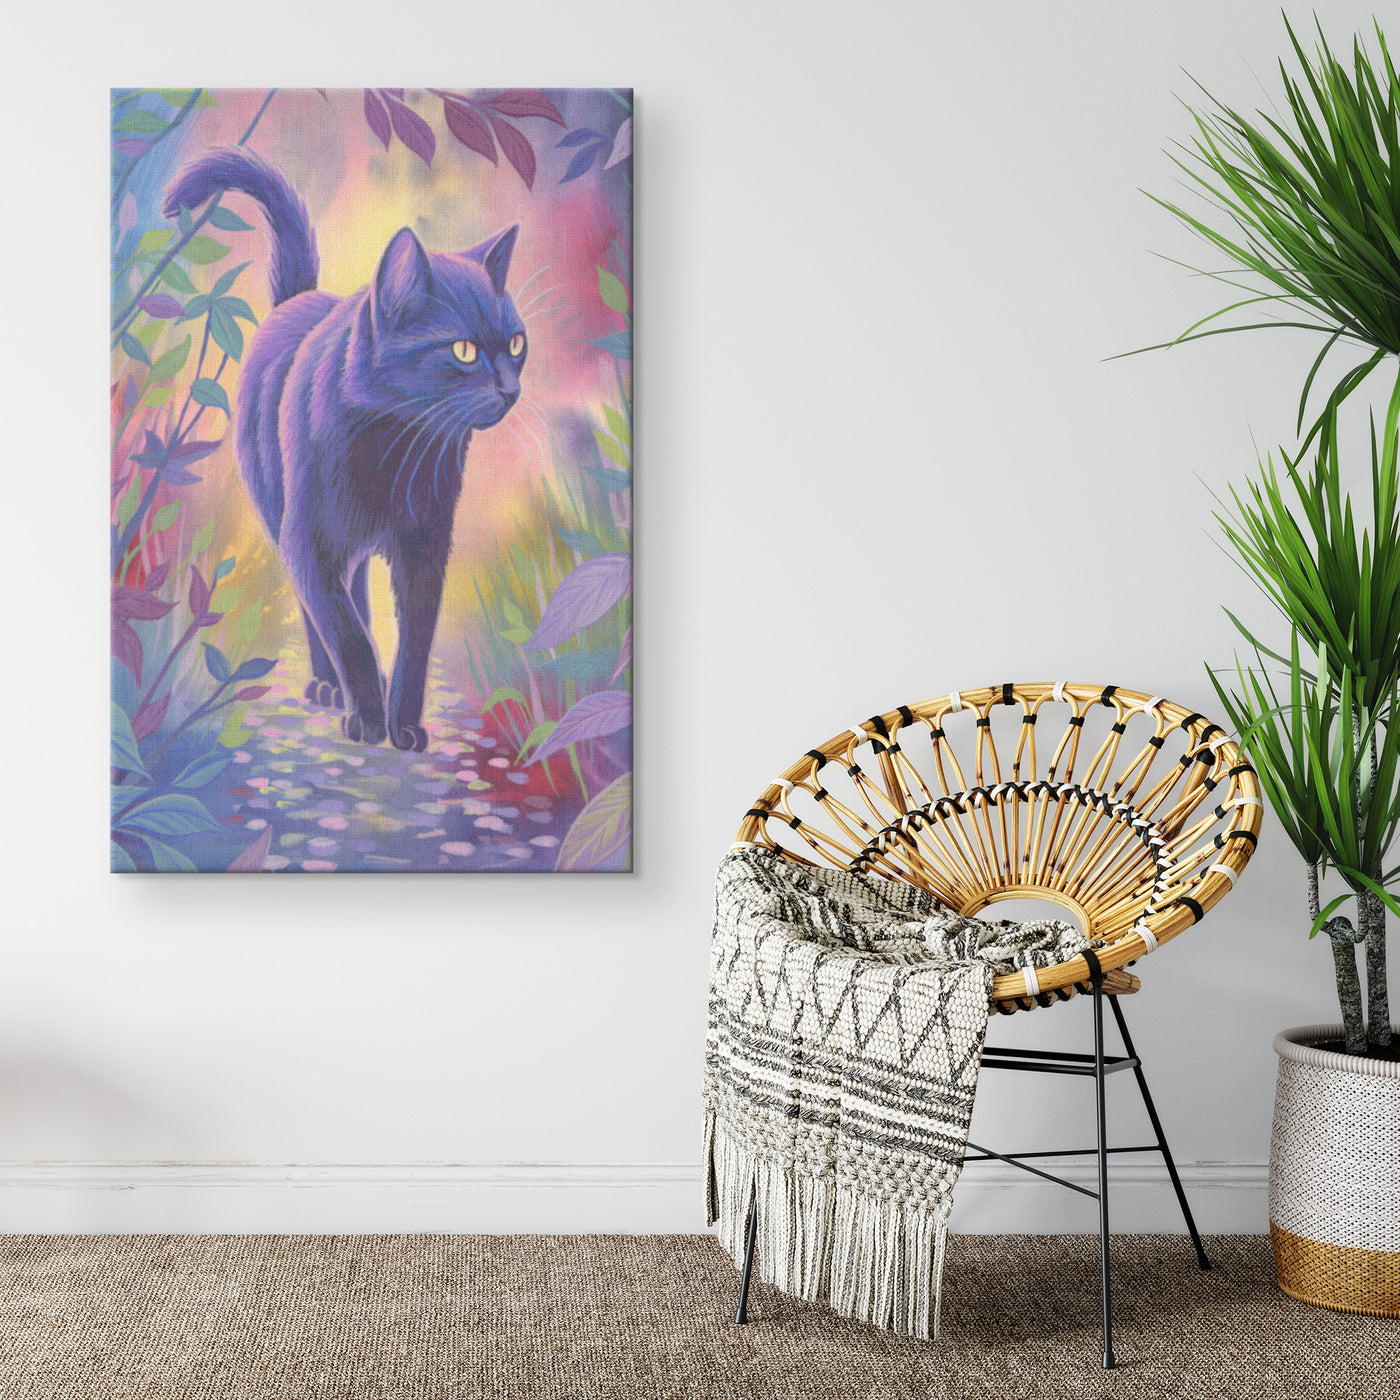 Colorful Canvas Art Print of a dark gray cat walking through a vibrant, stylized garden, displayed on a white wall next to a modern chair with a woven blanket.